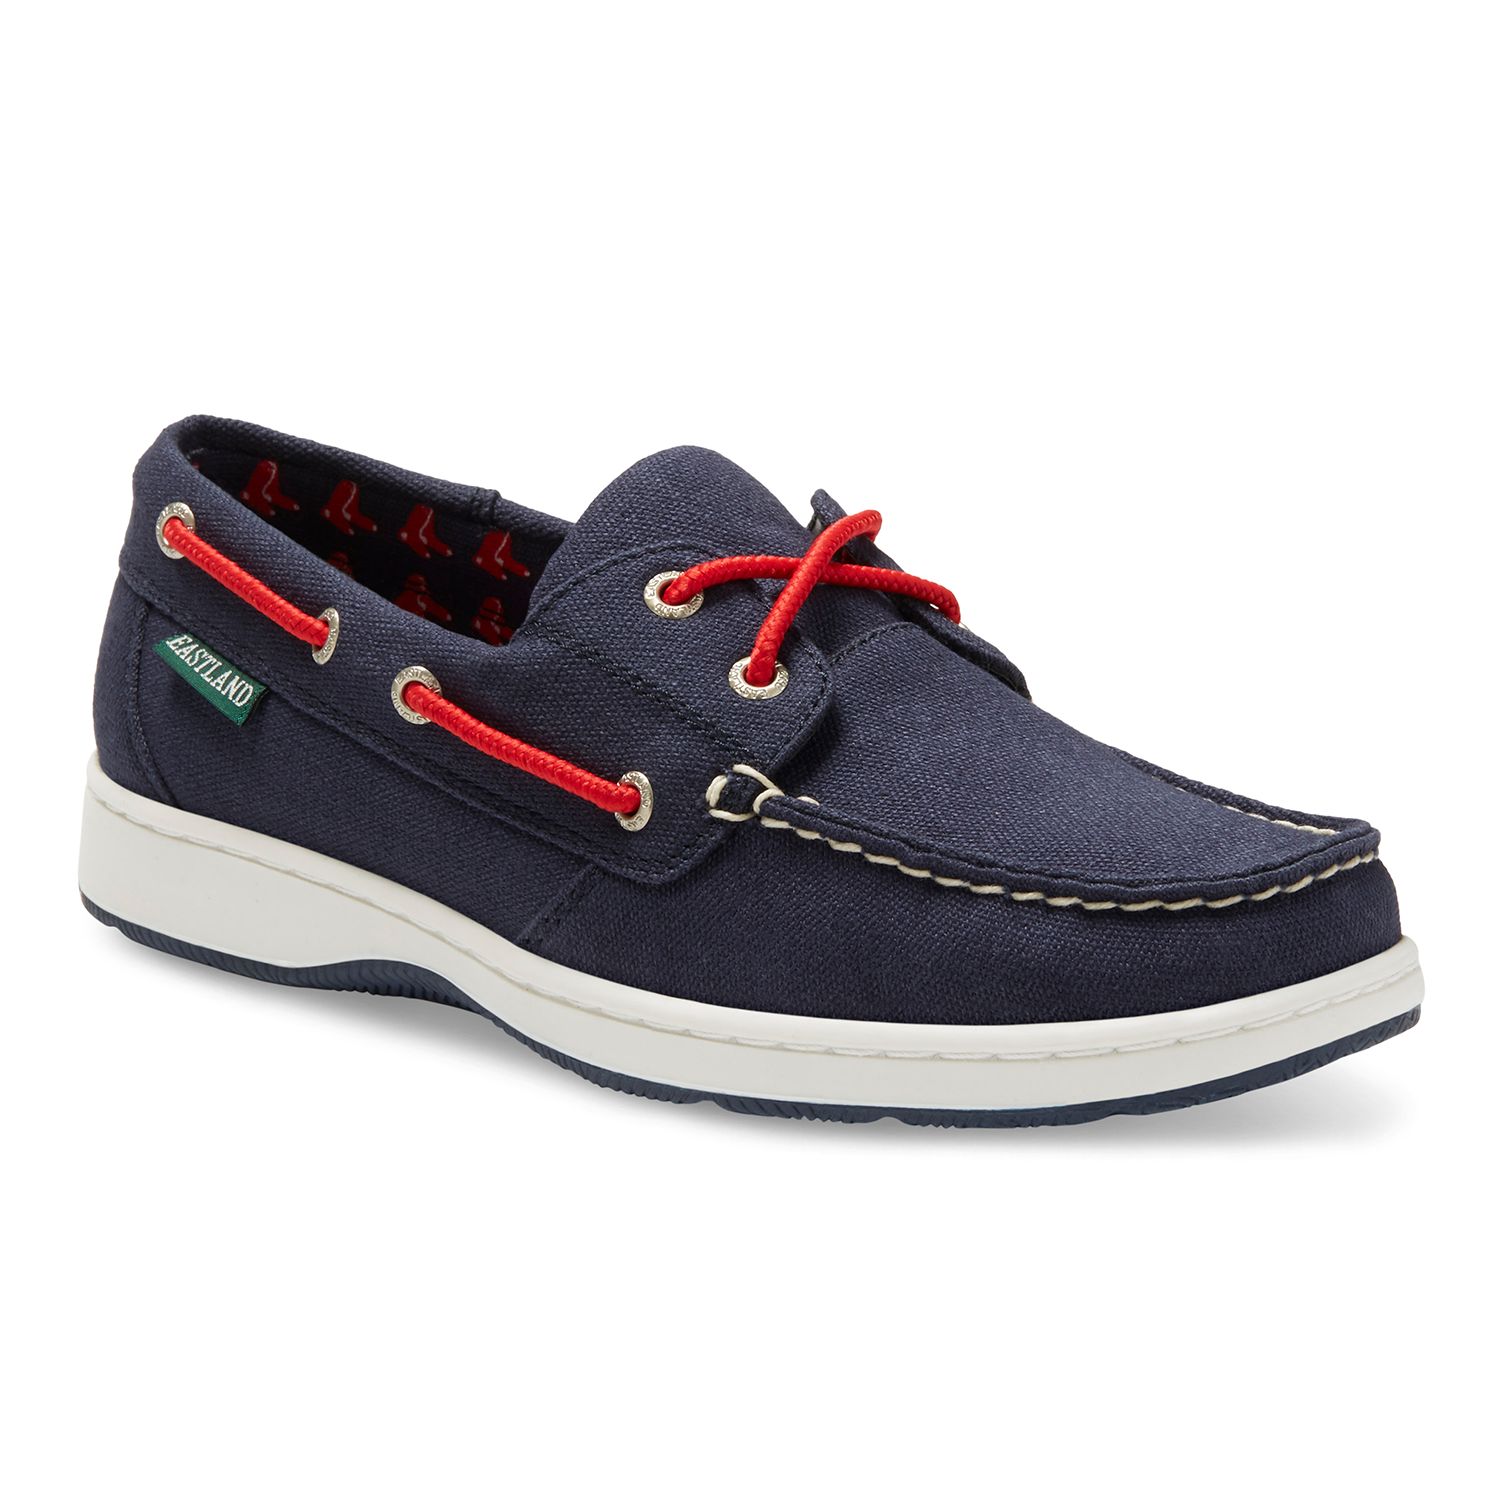 womens boat deck shoes